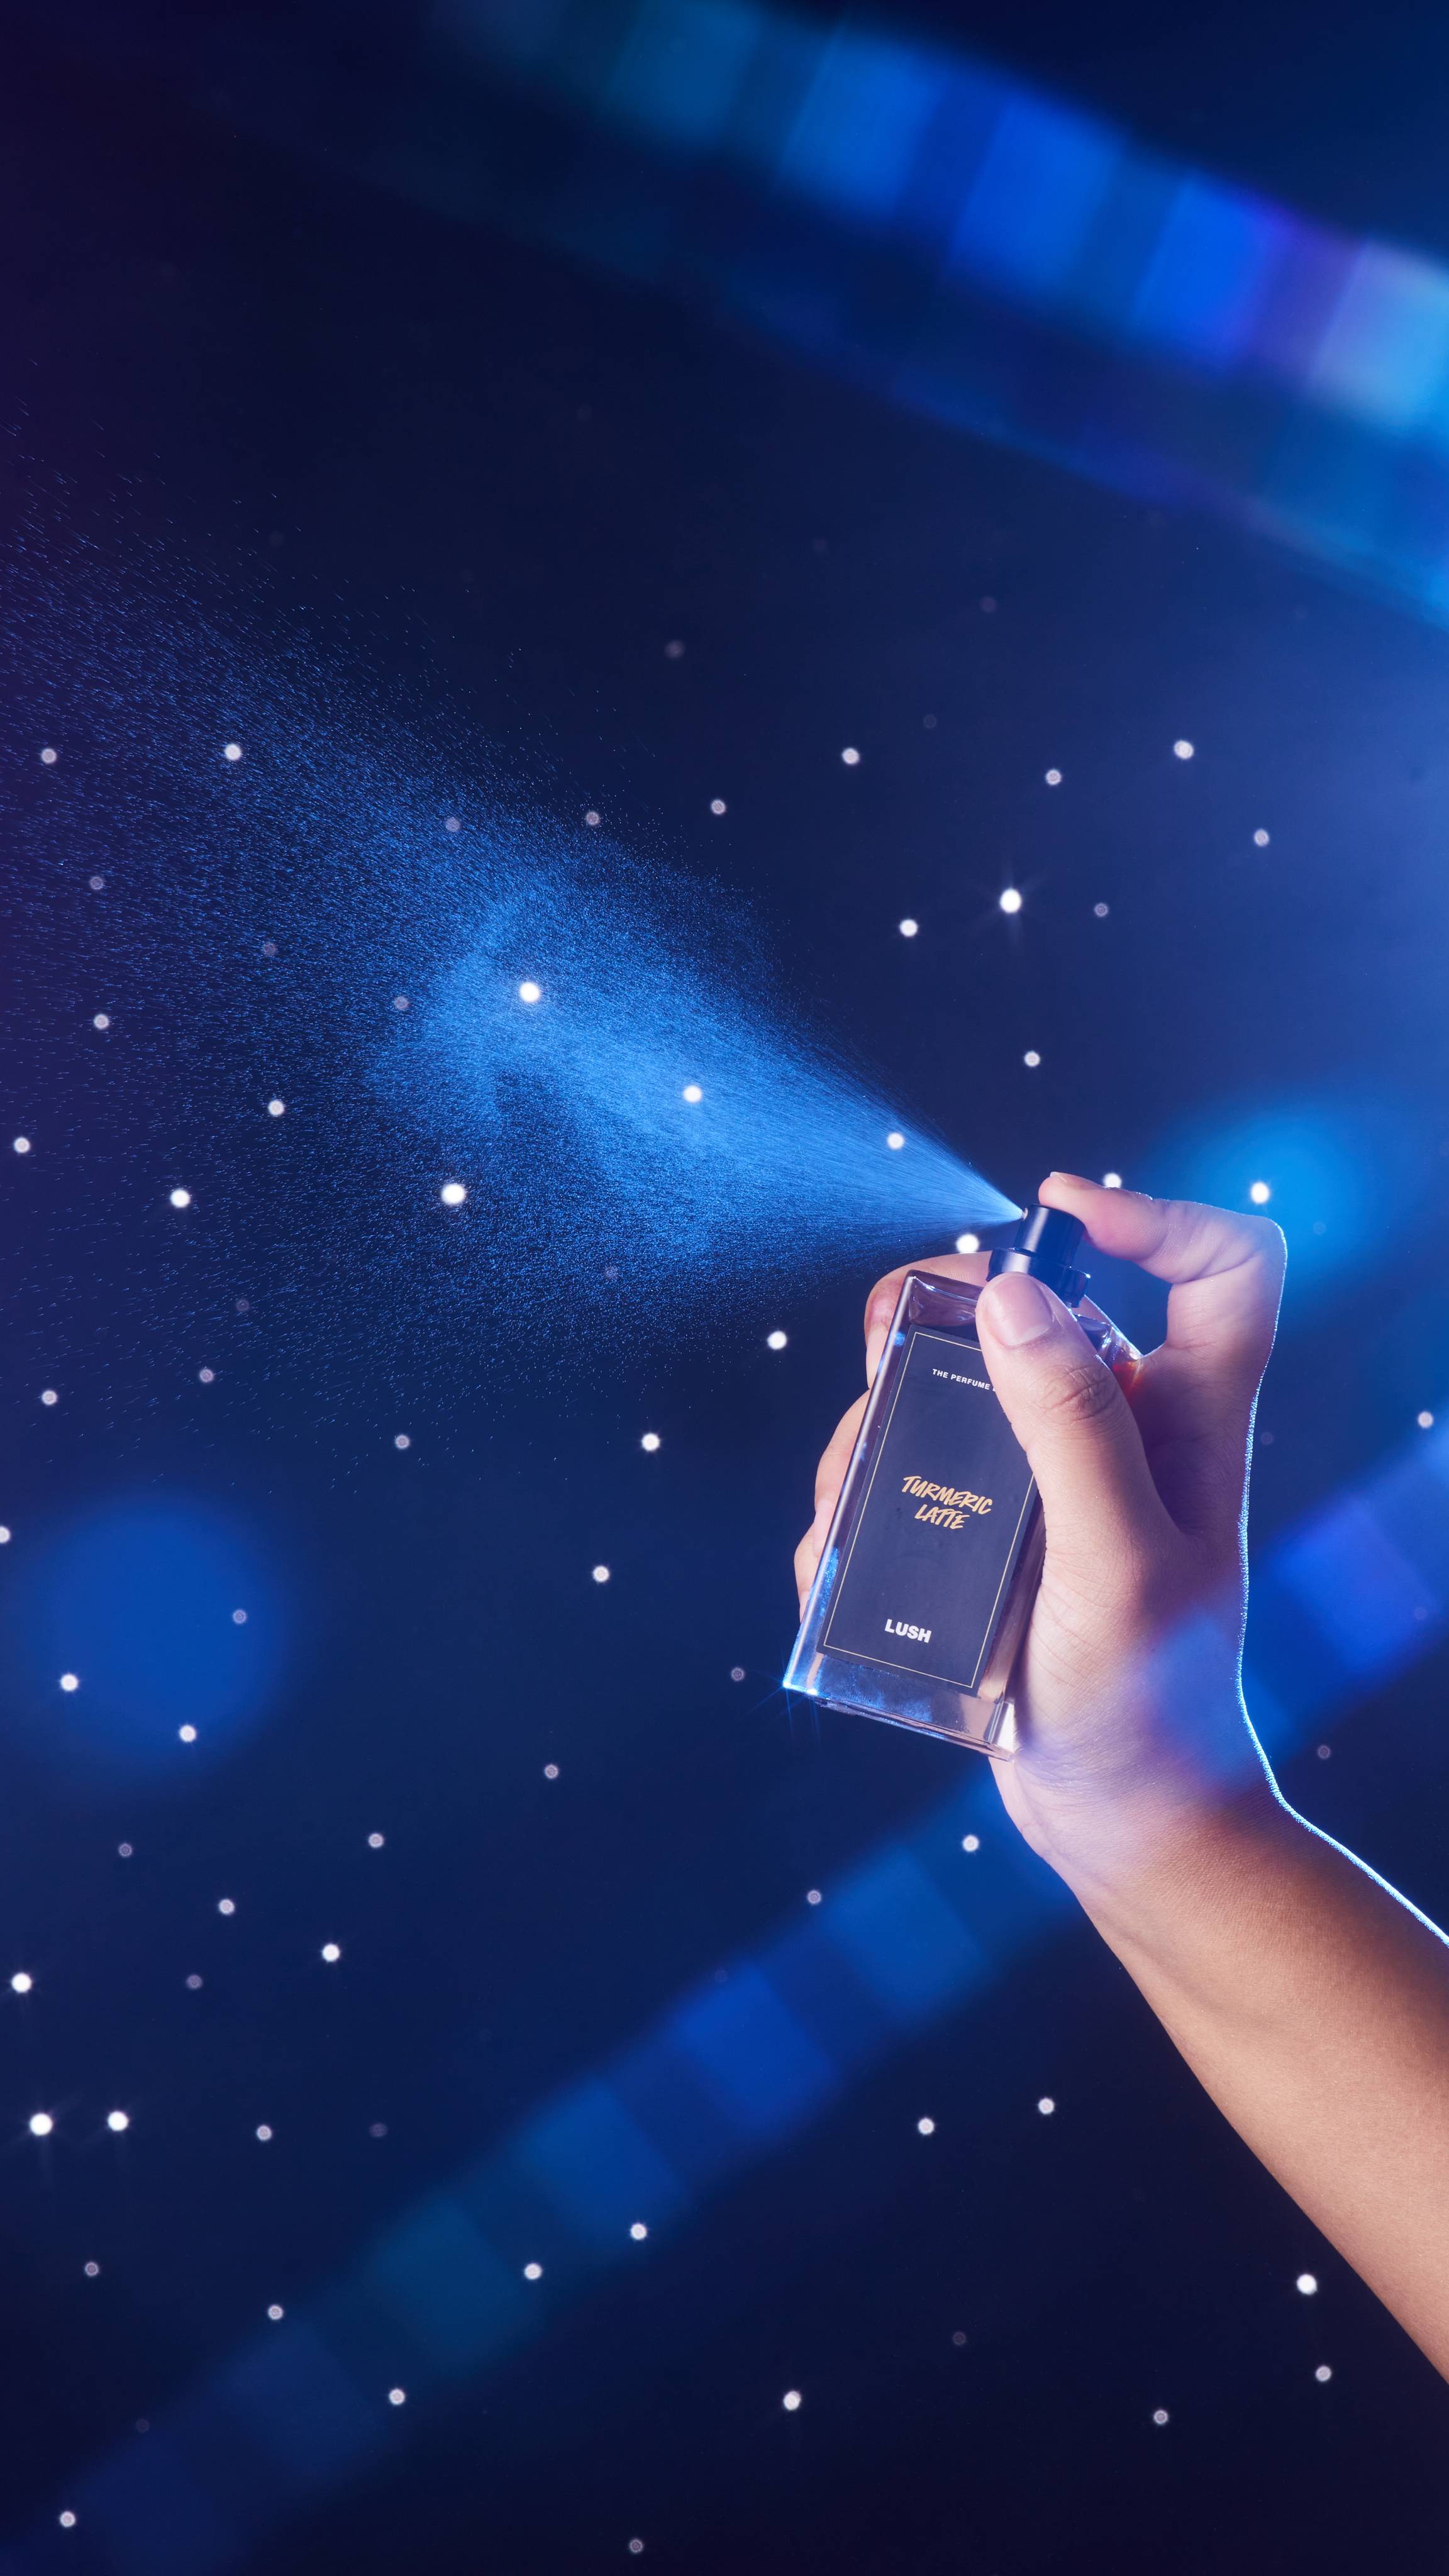 A close-up of the model's hand on a starry backdrop as they spritz the glass Turmeric Latter perfume bottle.